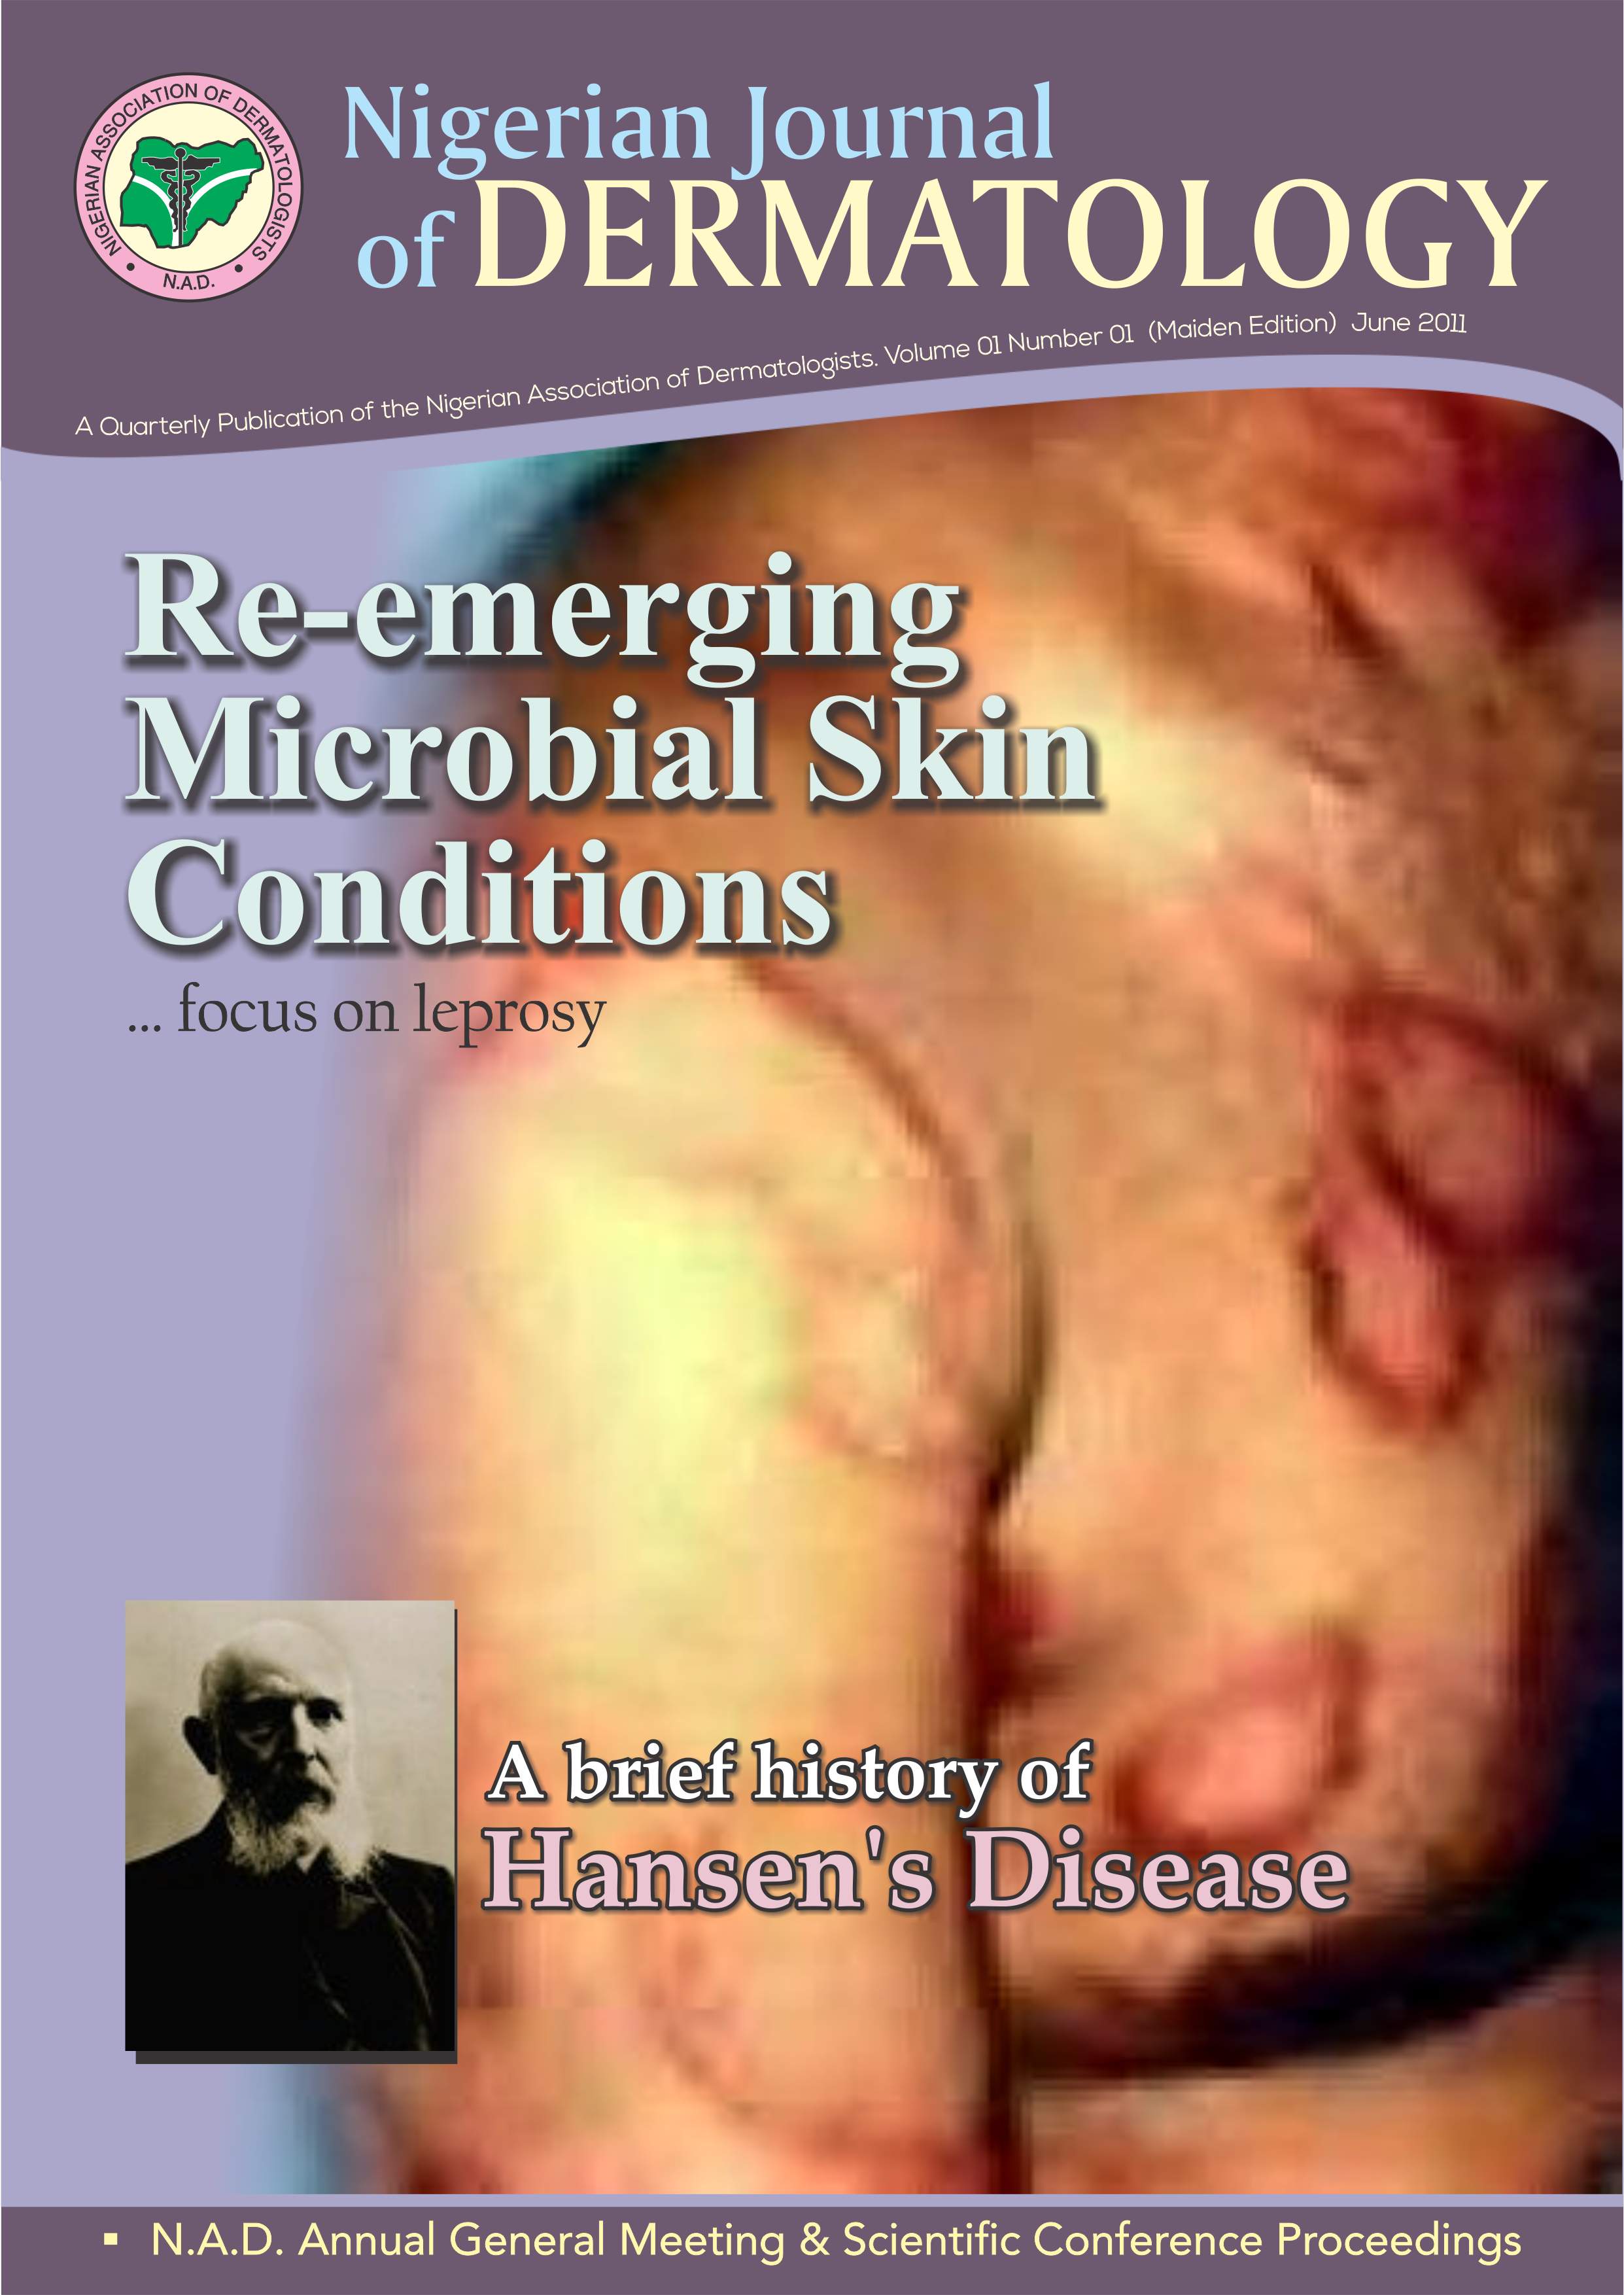 Nigerian Journal of Dermatology, Maiden issue. Re-emerging Microbial Skin Conditions...focus on leprosy